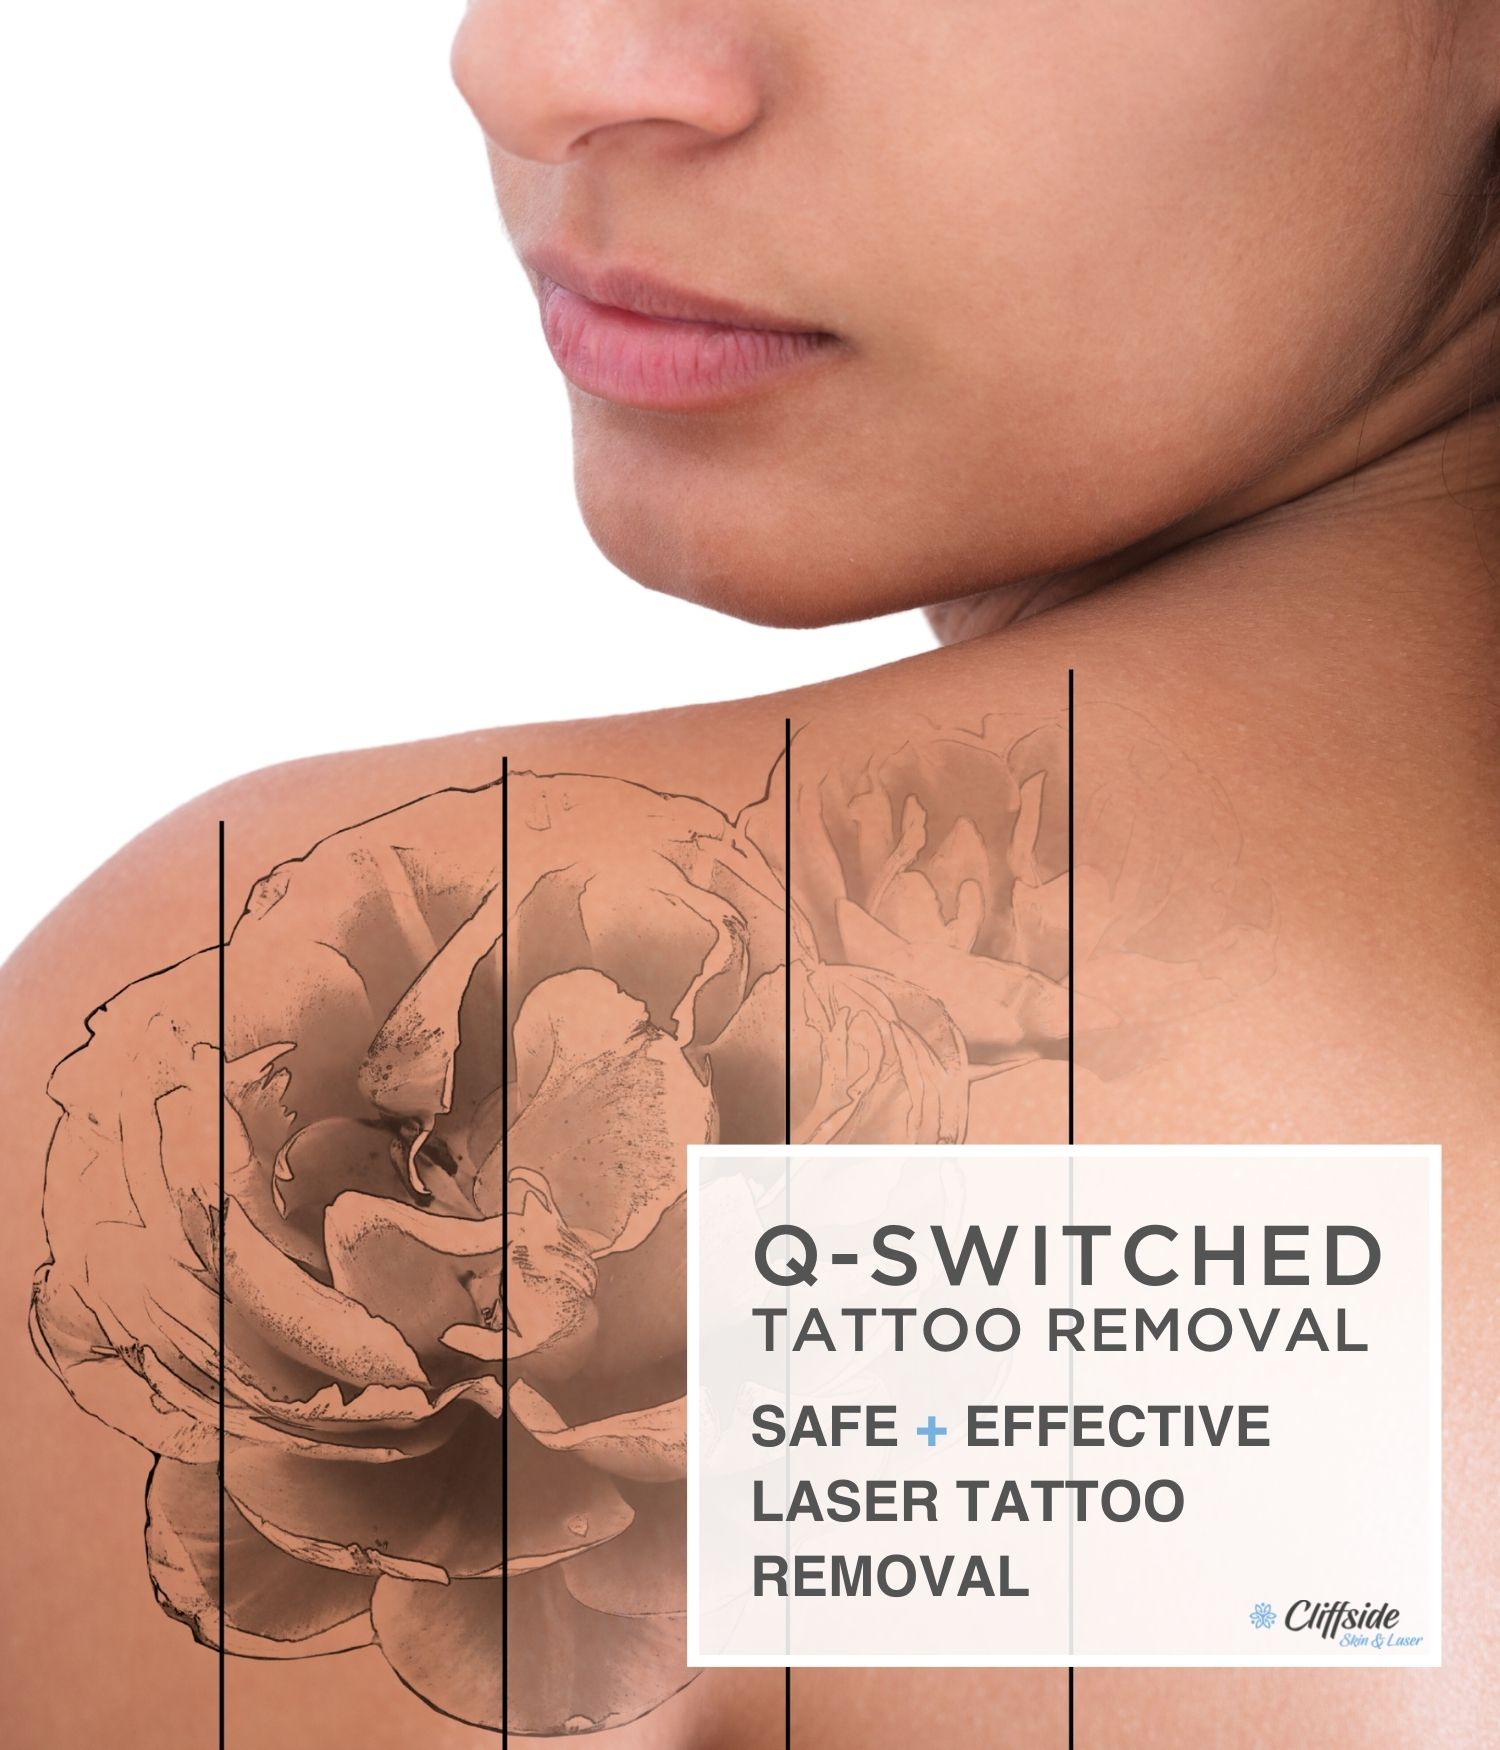 Laser tattoo removal on woman's back with Q-Switched